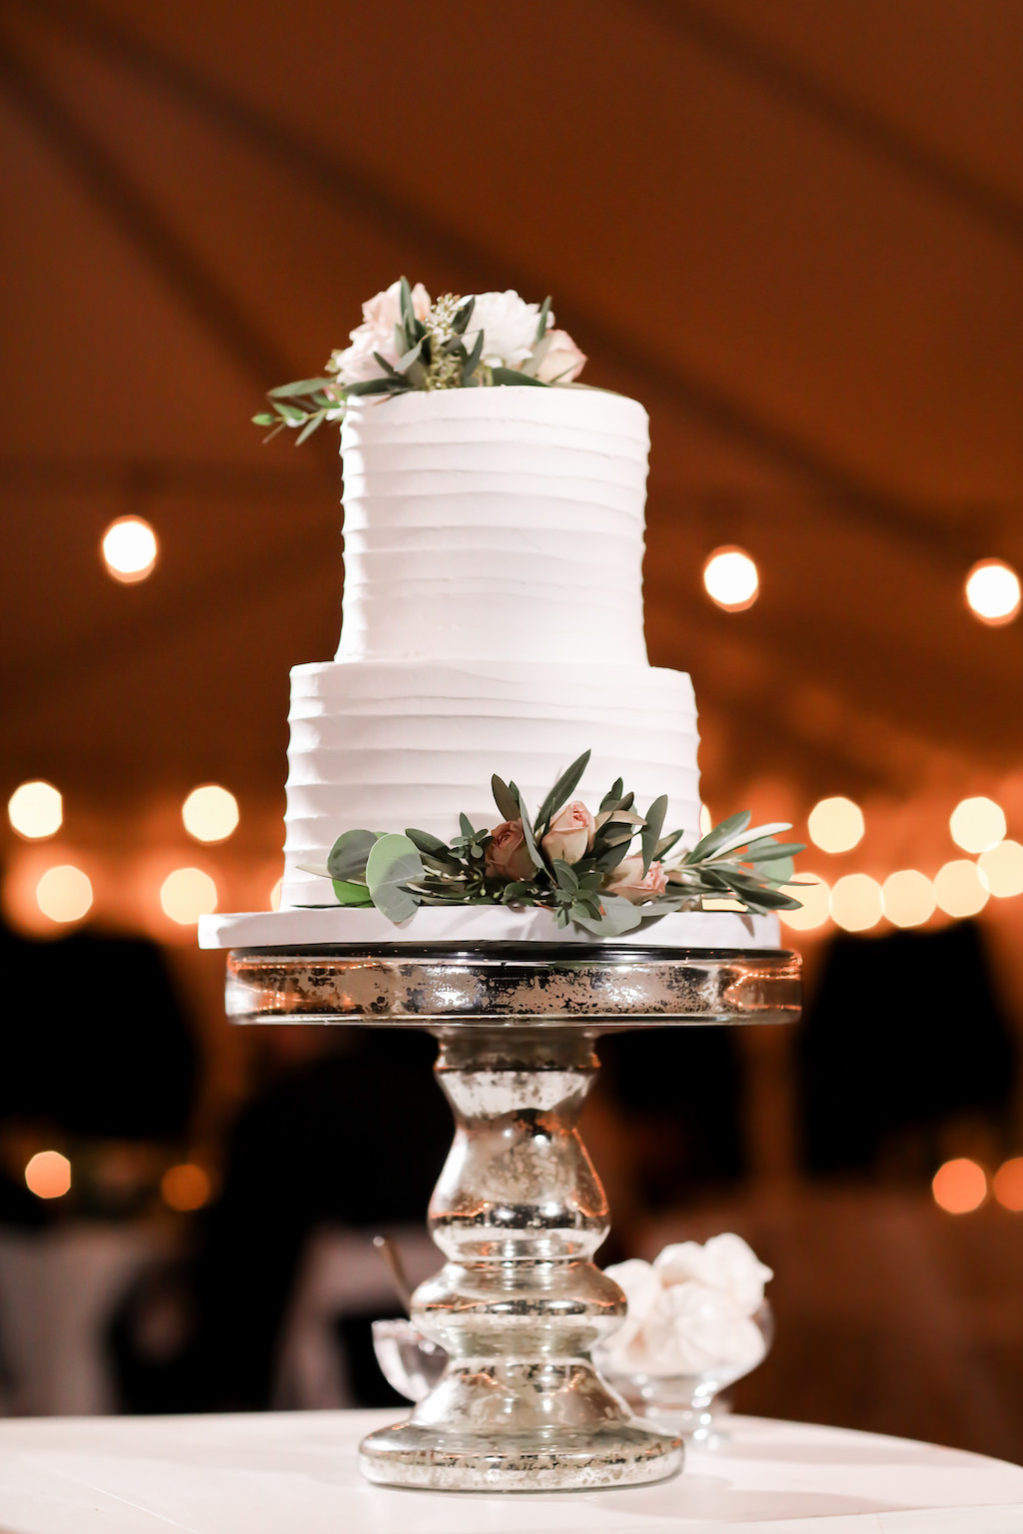 Simple Two Tier White Wedding Cake with Real Ivory, Greenery and Blush Pink Roses on Silver Mercury Cake Stand | Tampa Bay Wedding Photographer Lifelong Photography Studio | Wedding Planner Love Lee Lane | Wedding Cake Alessi Bakeries